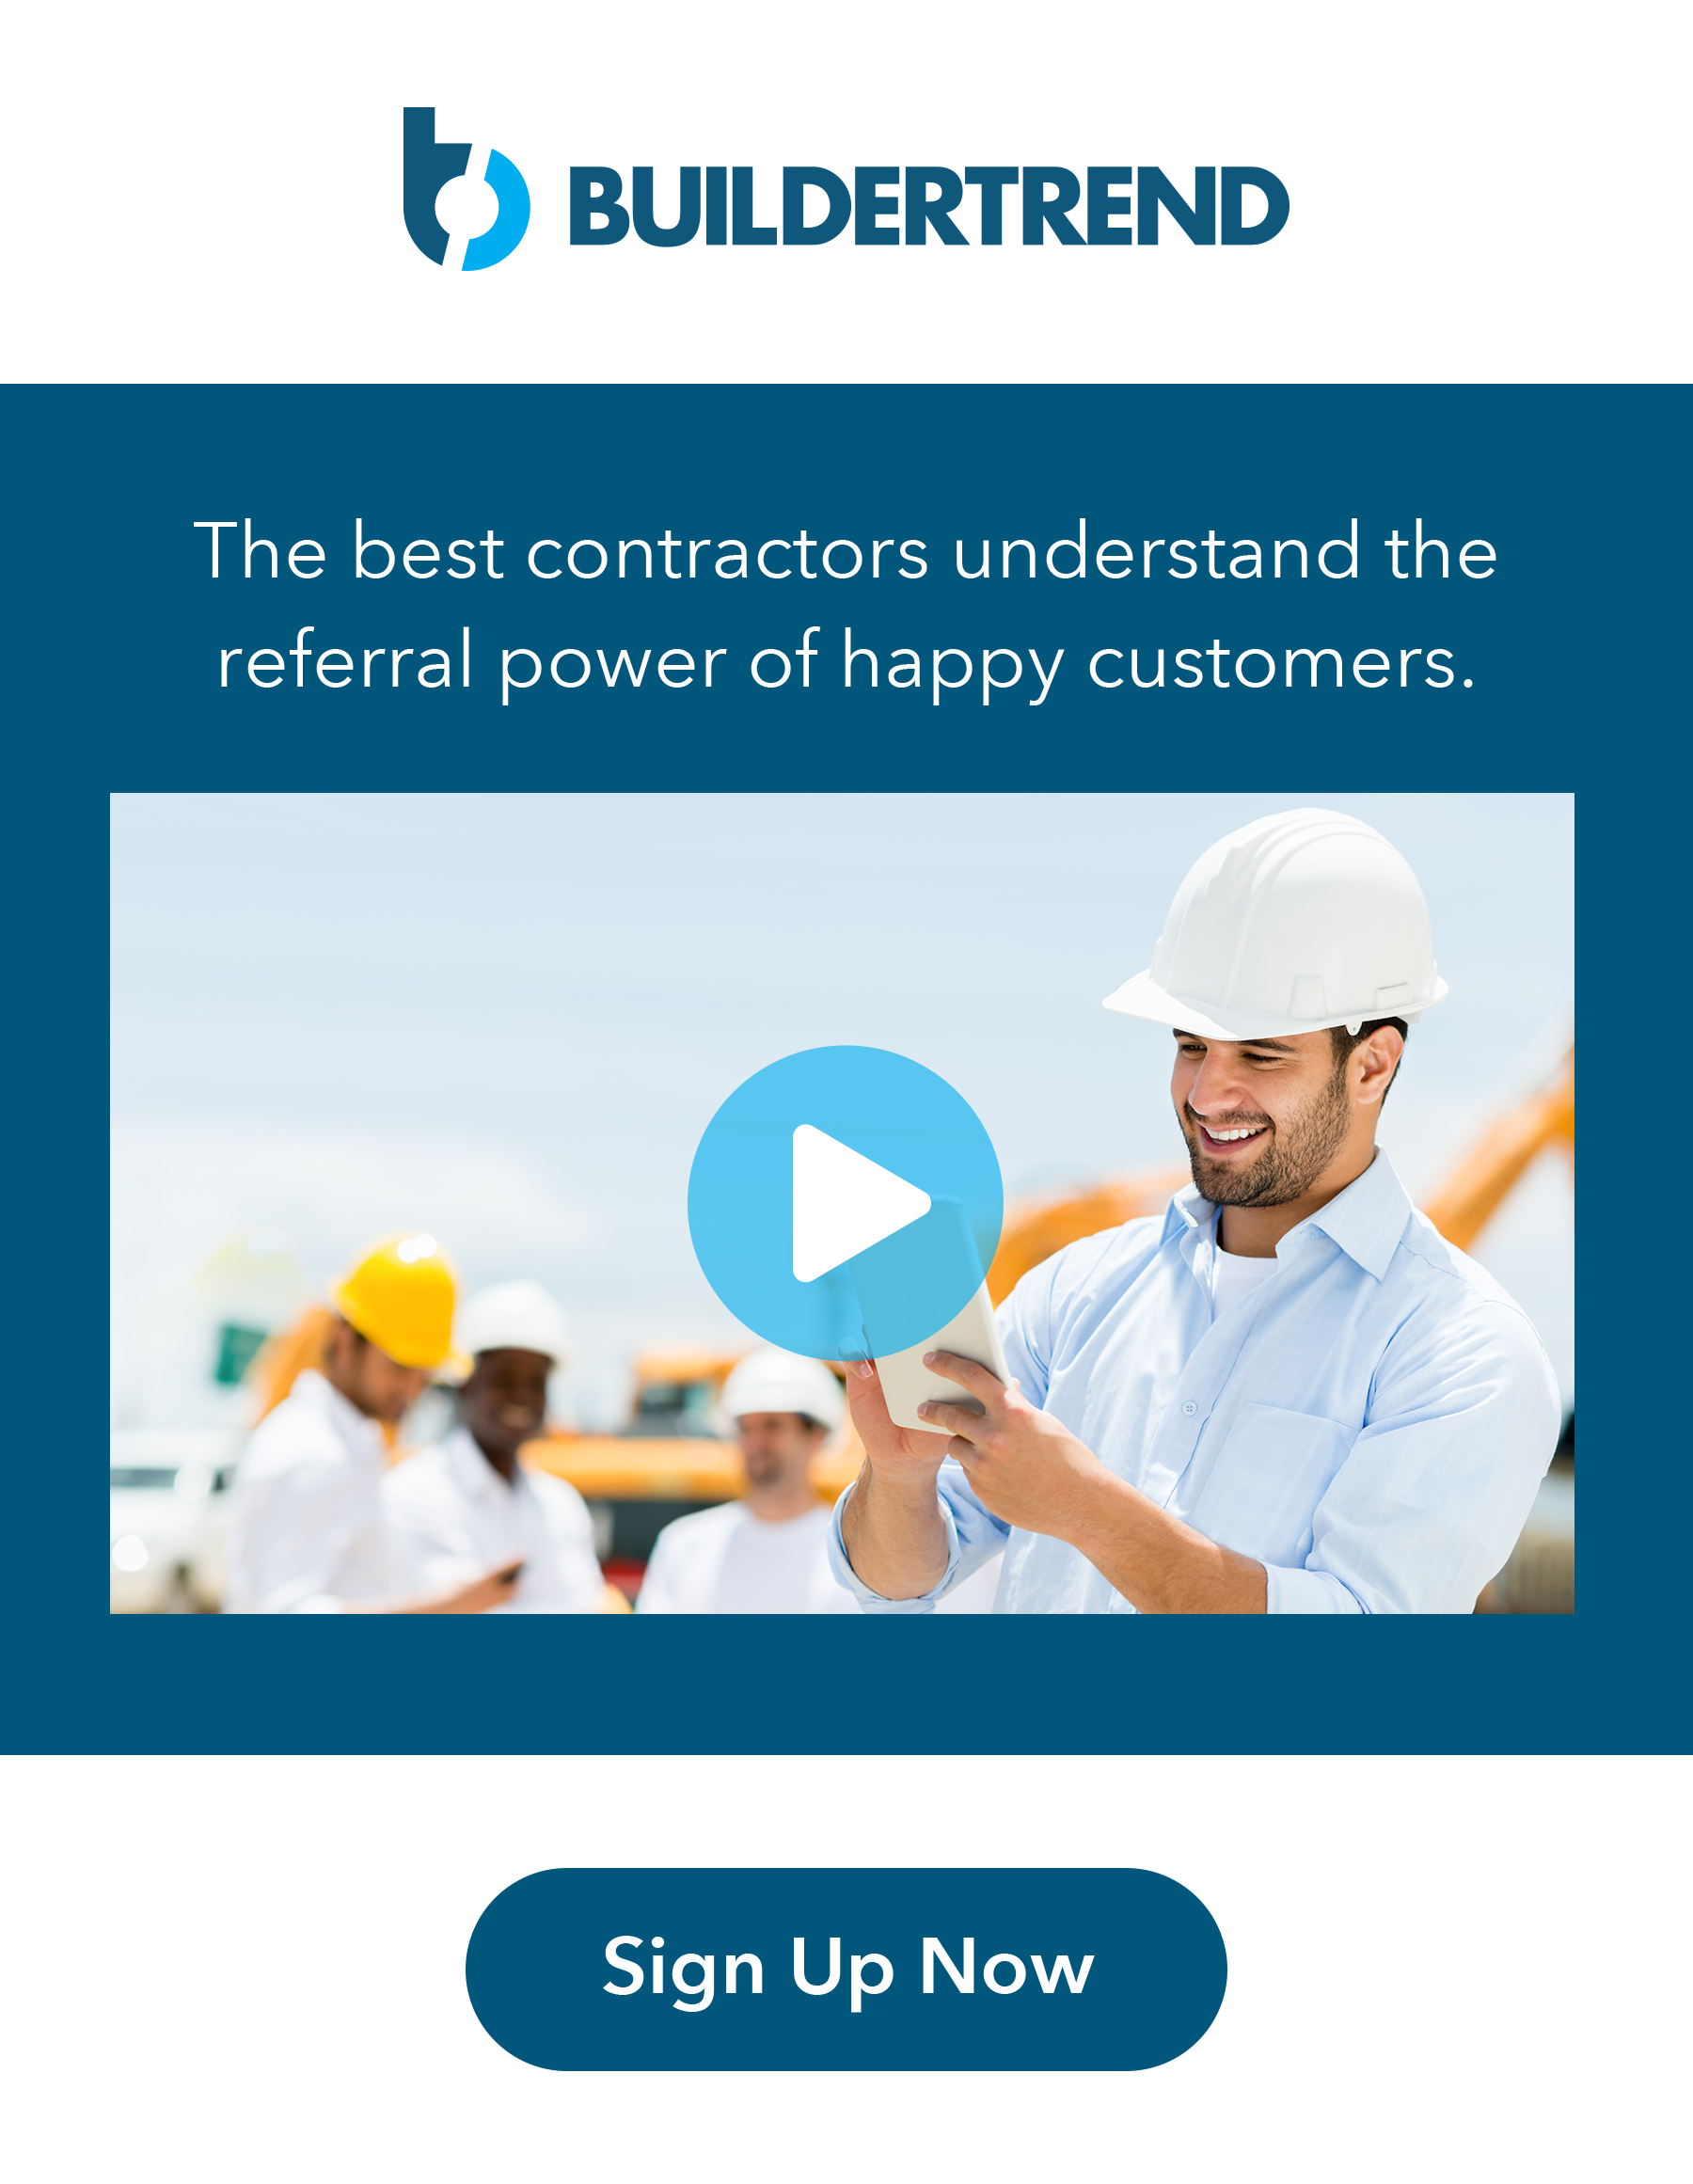 the best contractors understand the referral power of happy customers - sign up now